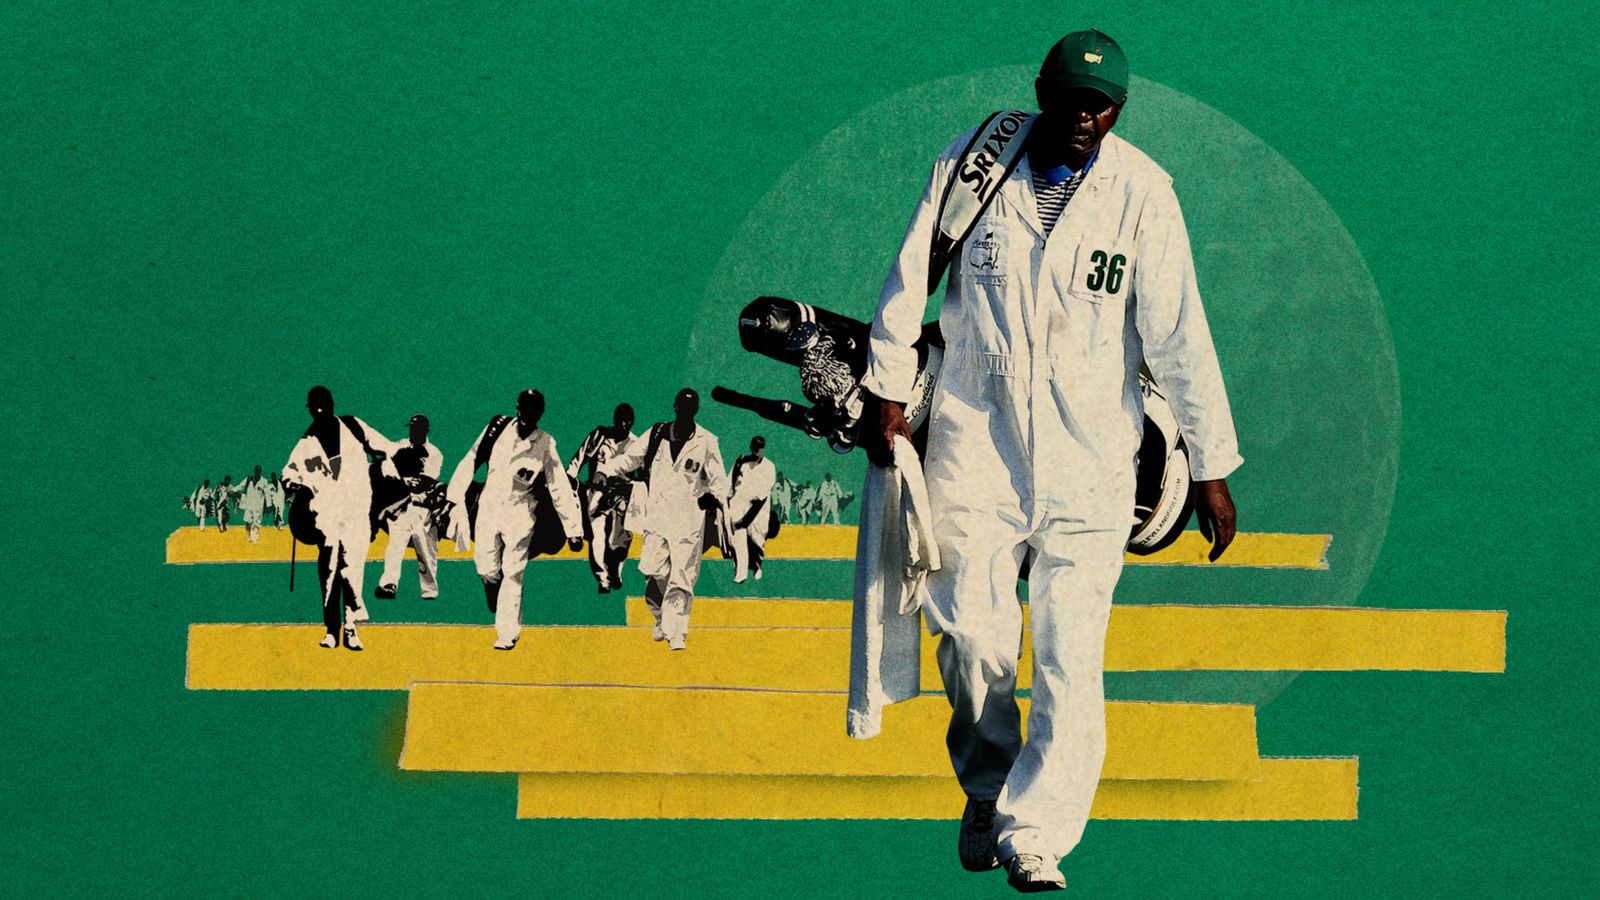 The Masters were caddied by only Black men for nearly 50 years